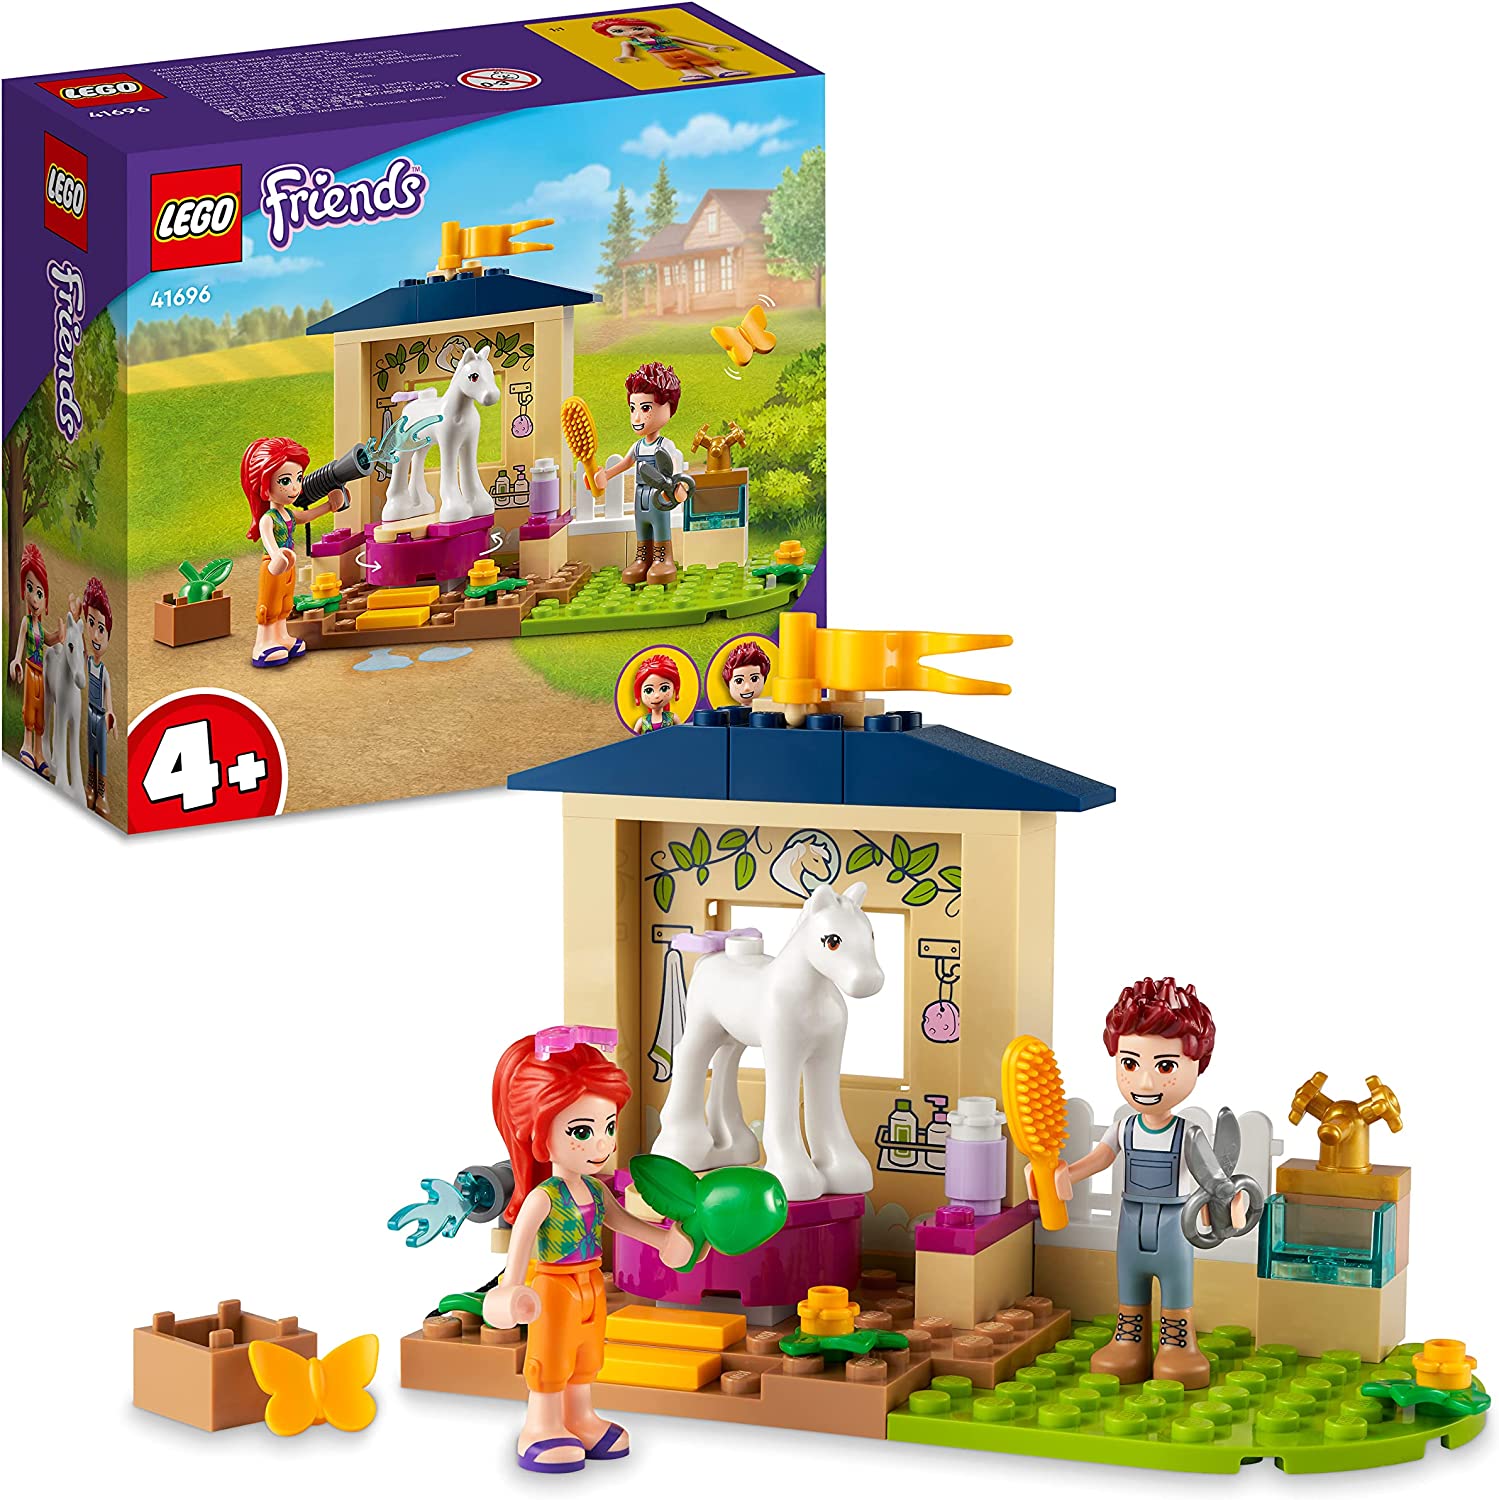 LEGO 41696 Friends Pony Care, Horse Stable with Horse Figure and Mia Mini Doll, Farm Toy for Children from 4 Years